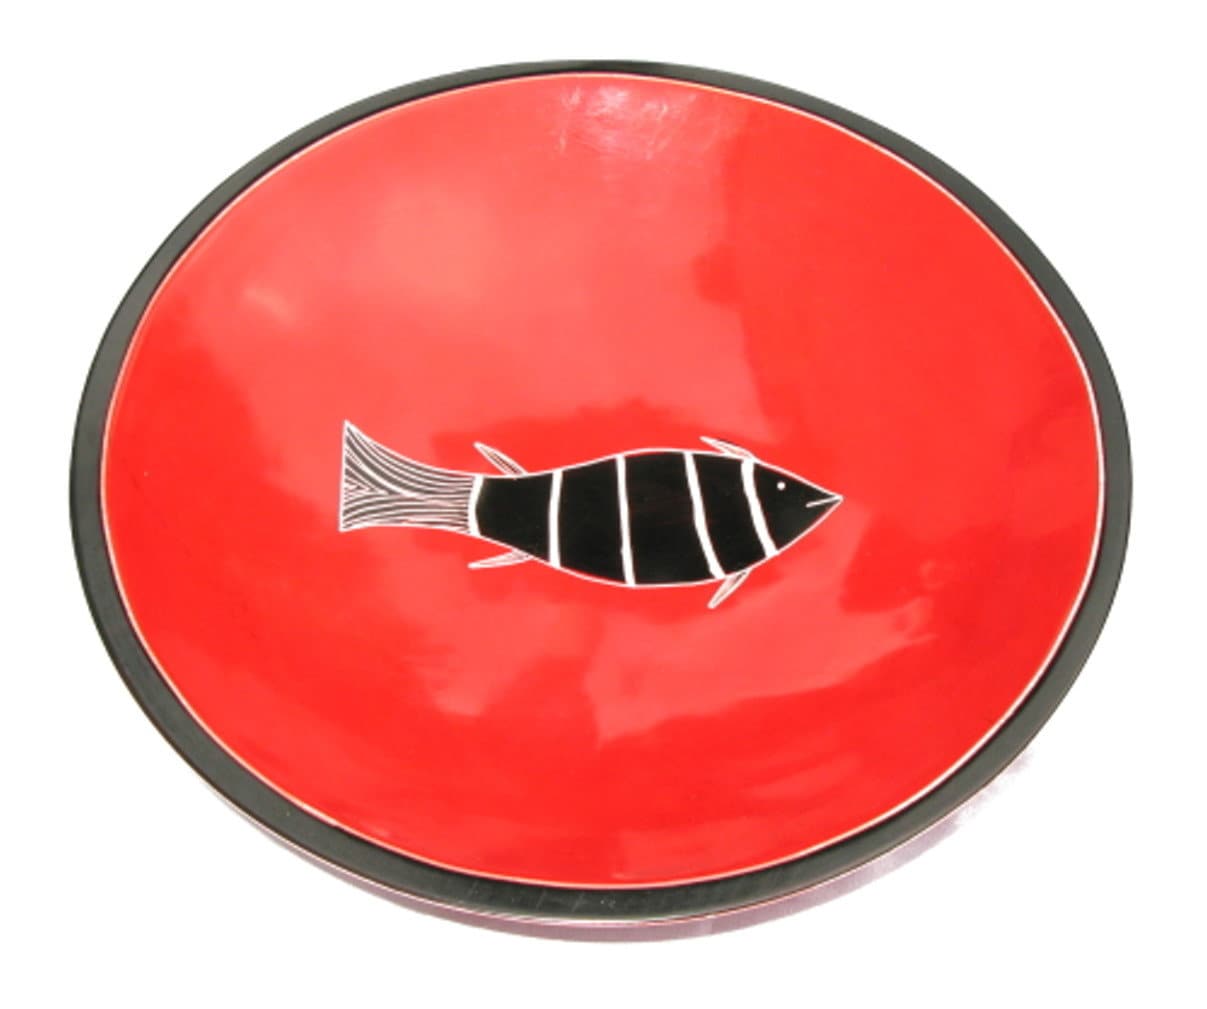 Handcrafted Stone Fruit Bowl Red Fish Design 10" / 25 cm Fairly Traded with Storycard